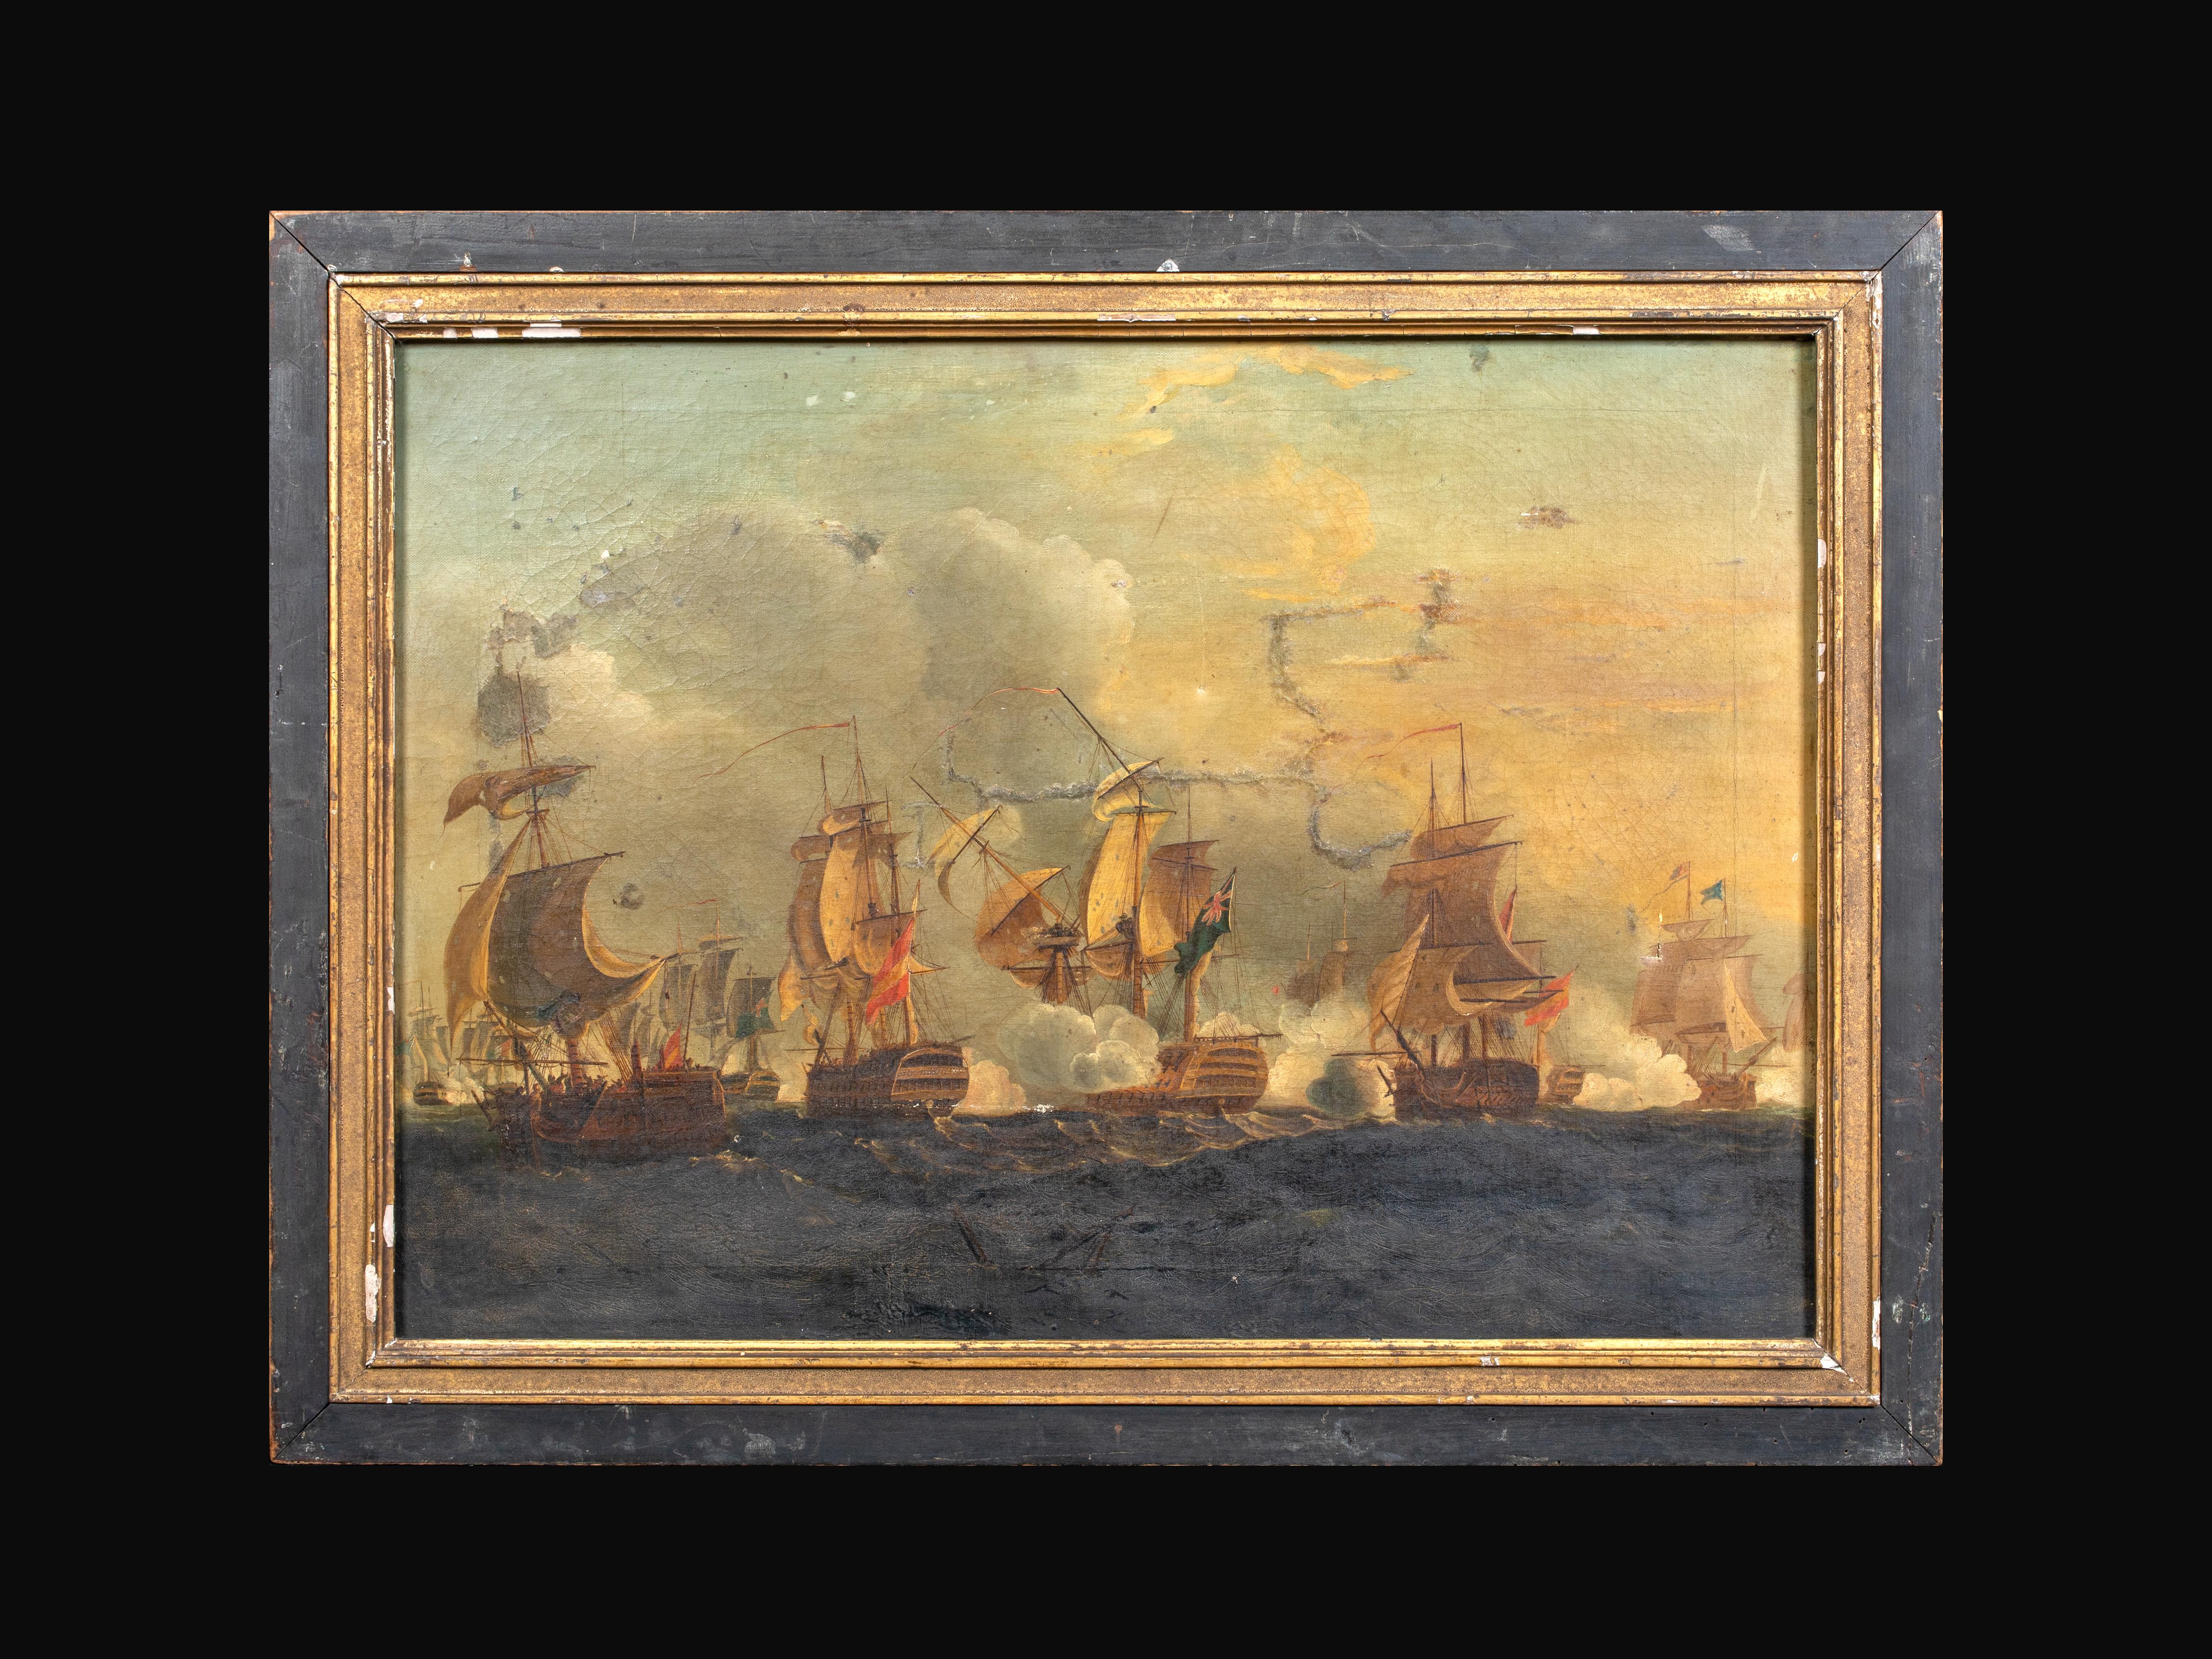 The Battle of Cape St Vincent, Anglo-Spanish War, 1797  - Painting by Thomas Luny